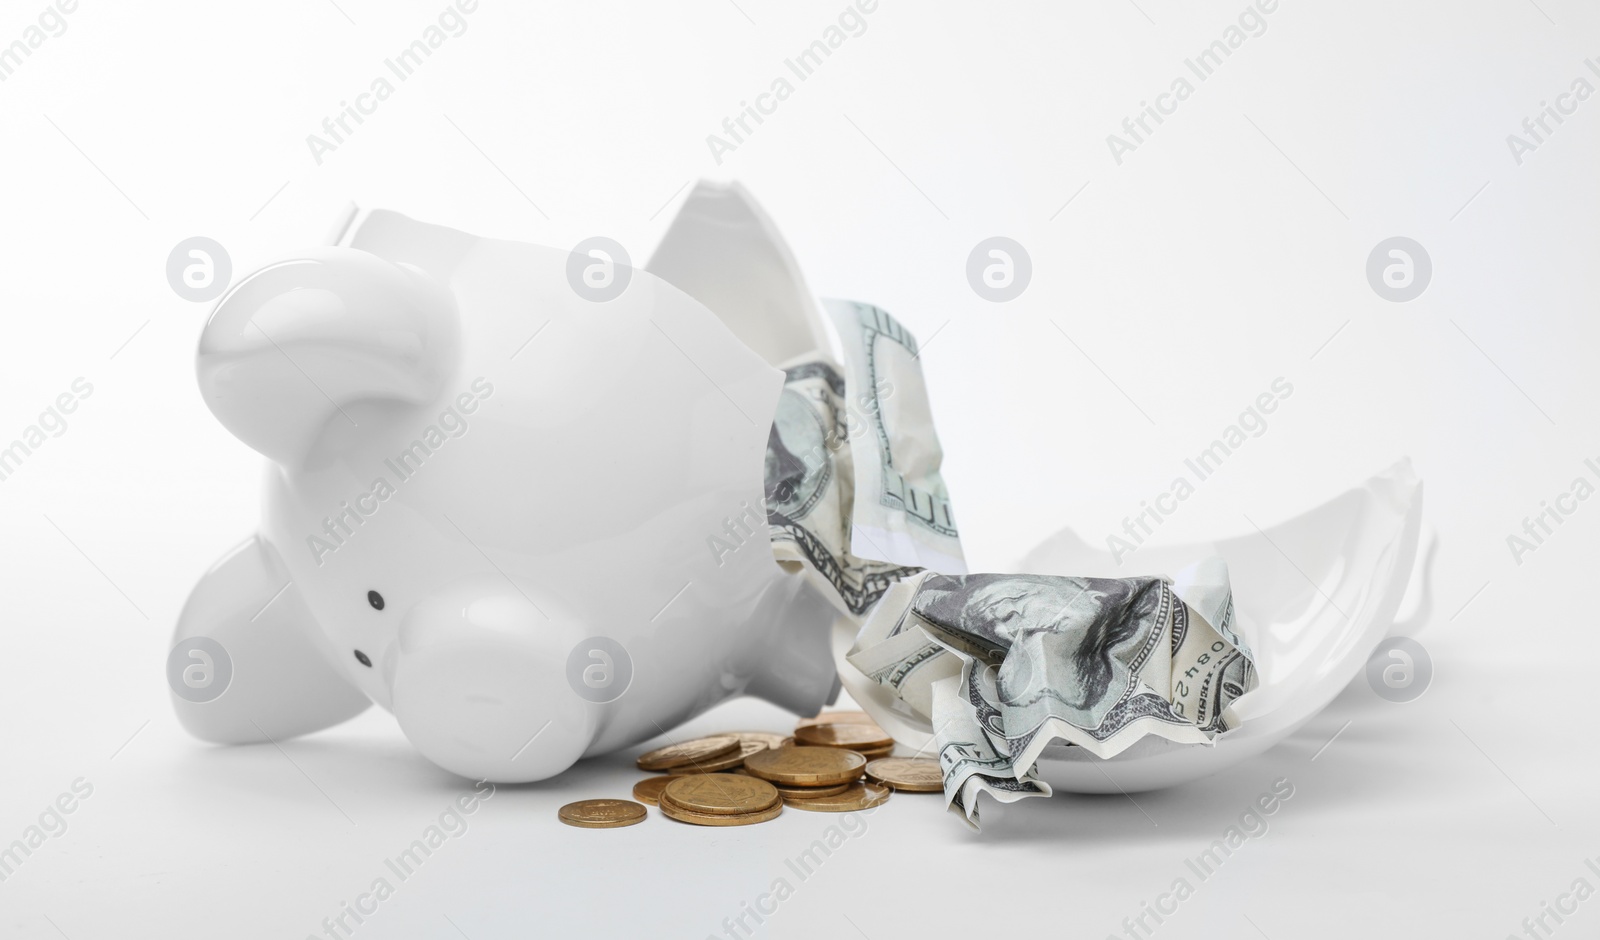 Photo of Broken piggy bank with coins and banknotes on white background